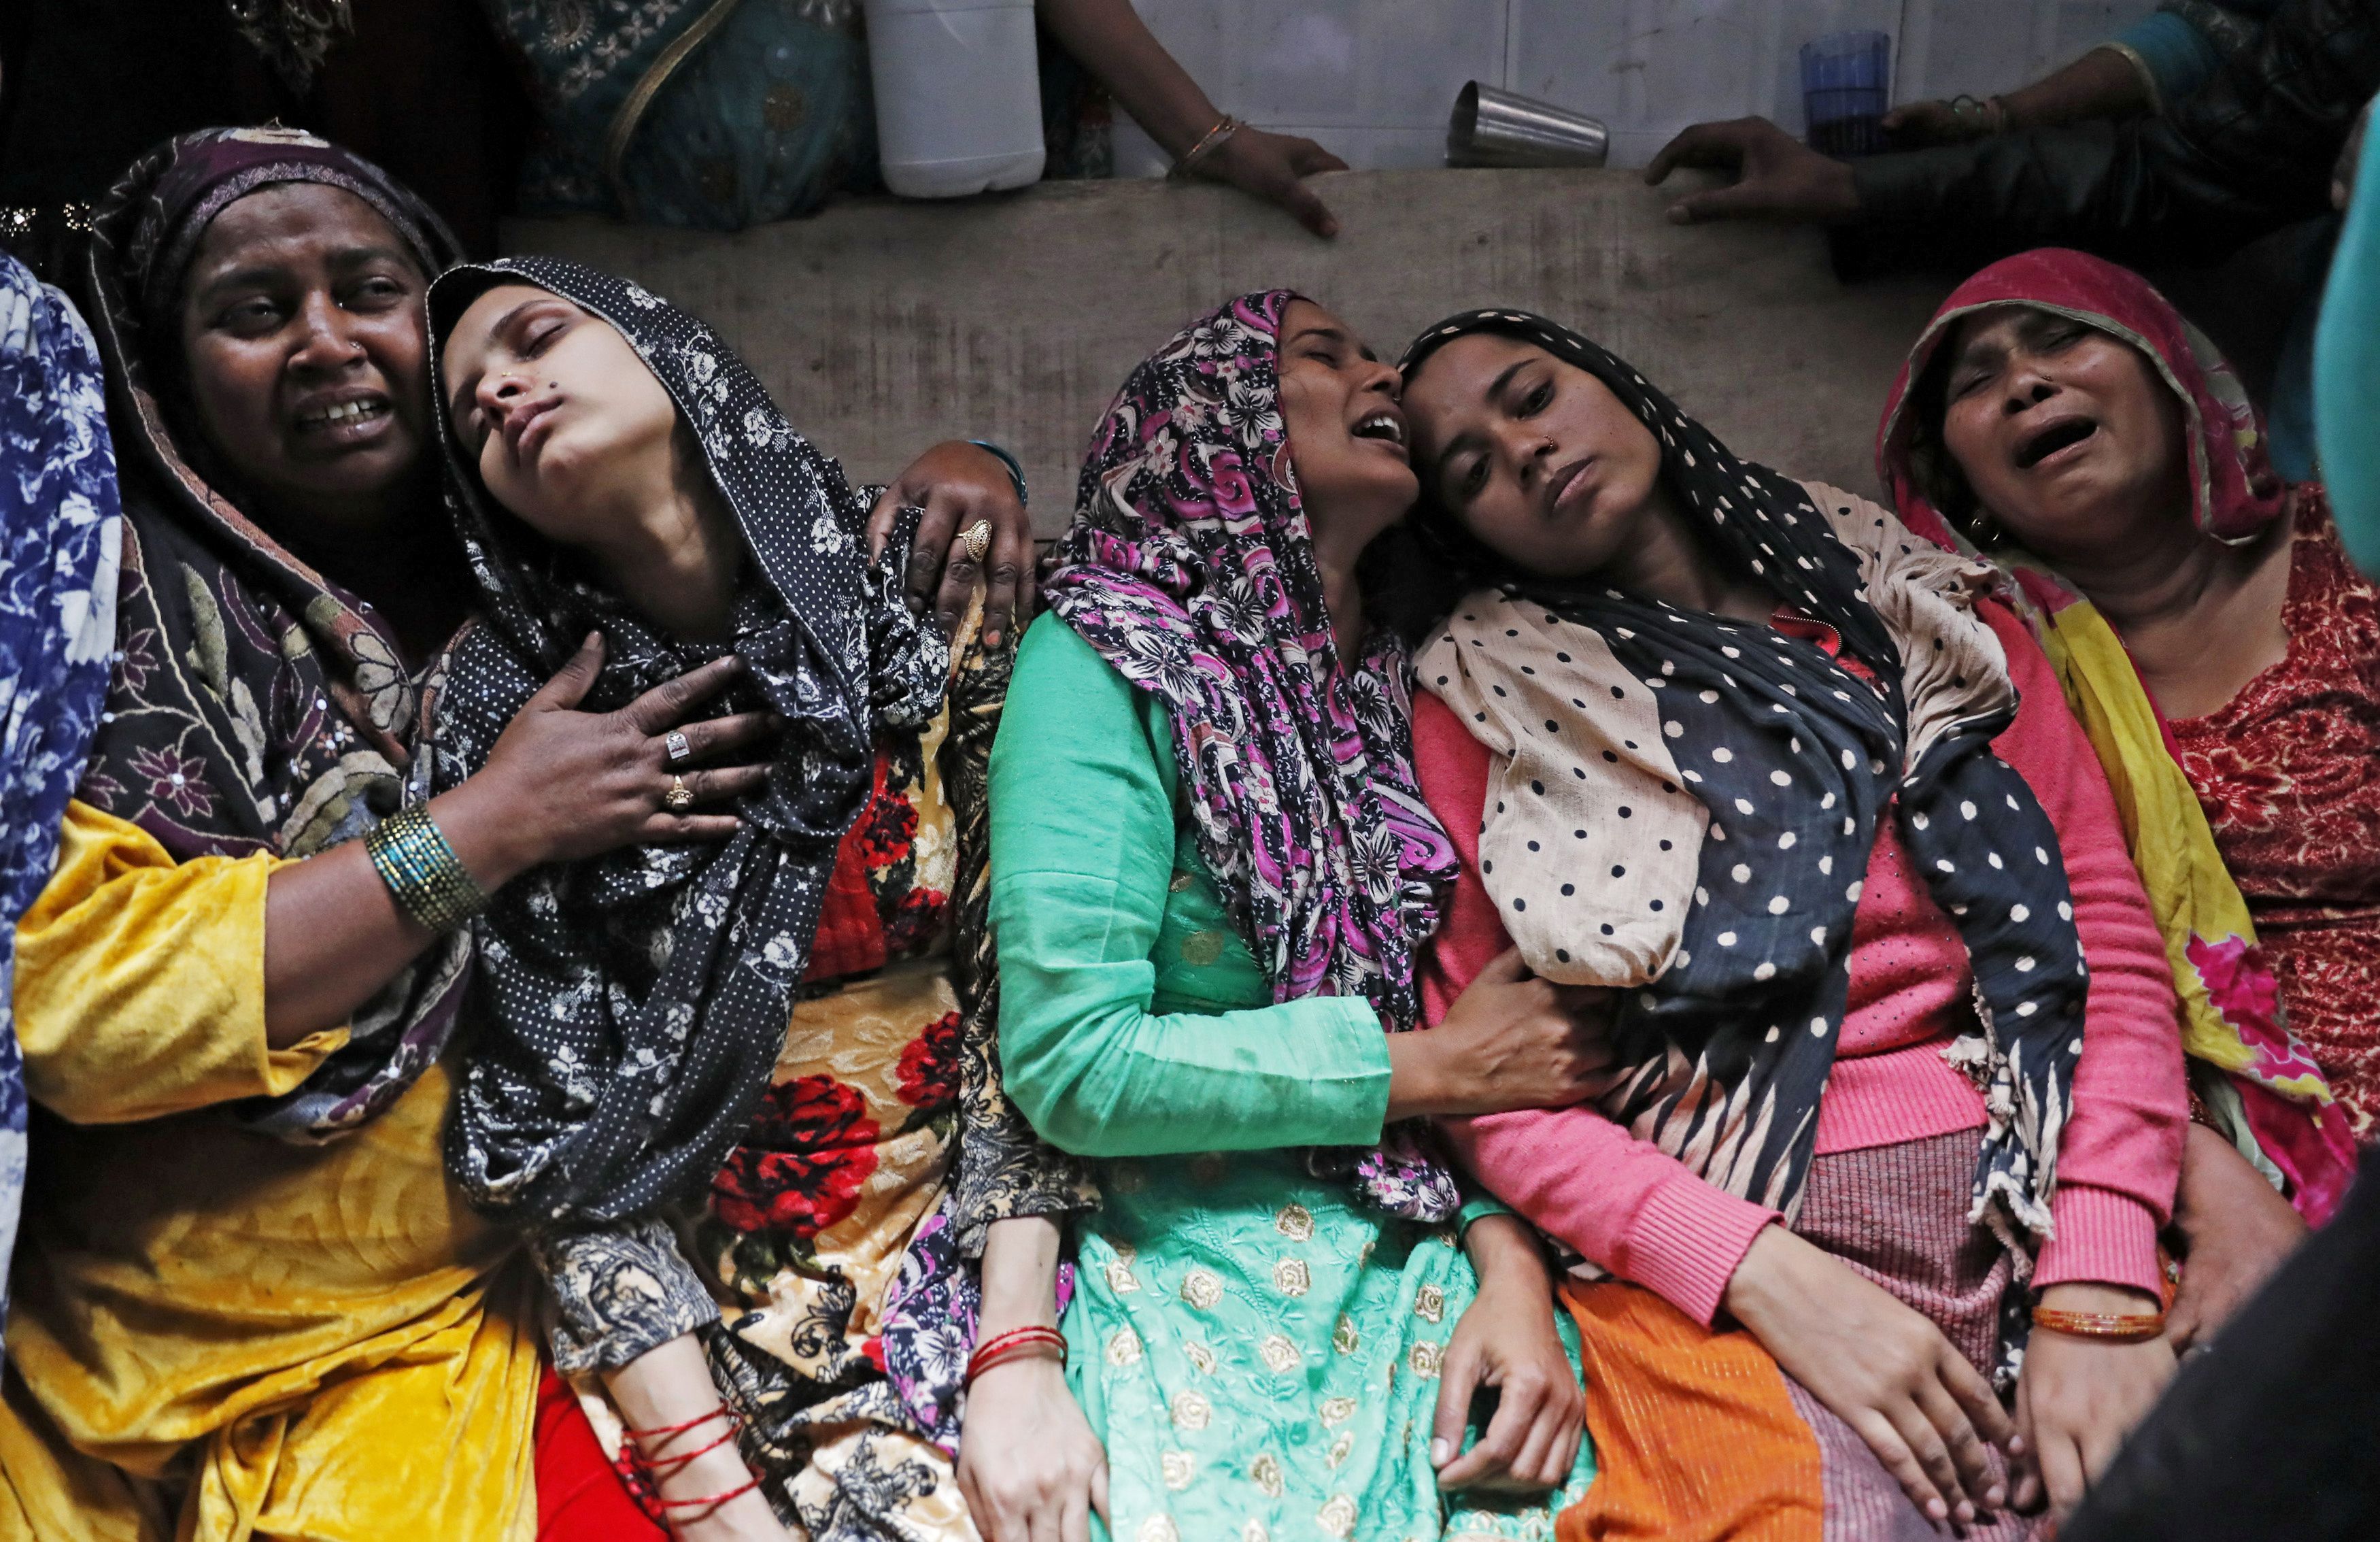   Relatives mourn next to the body of Hashim Ali who succumbed to his injuries, in a riot affected area in New Delhi, India, on 29 February 